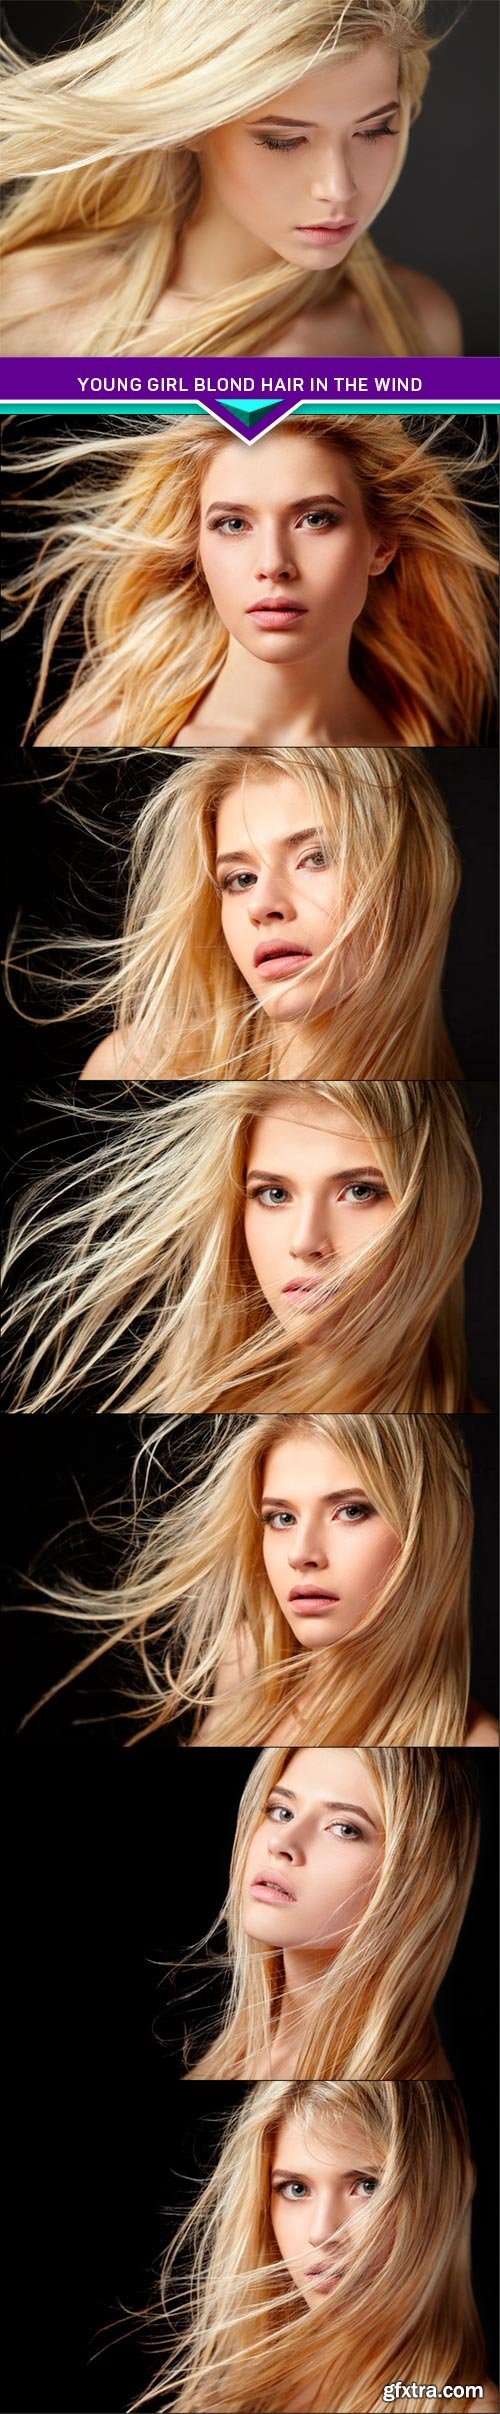 Young girl blond hair in the wind 7x JPEG